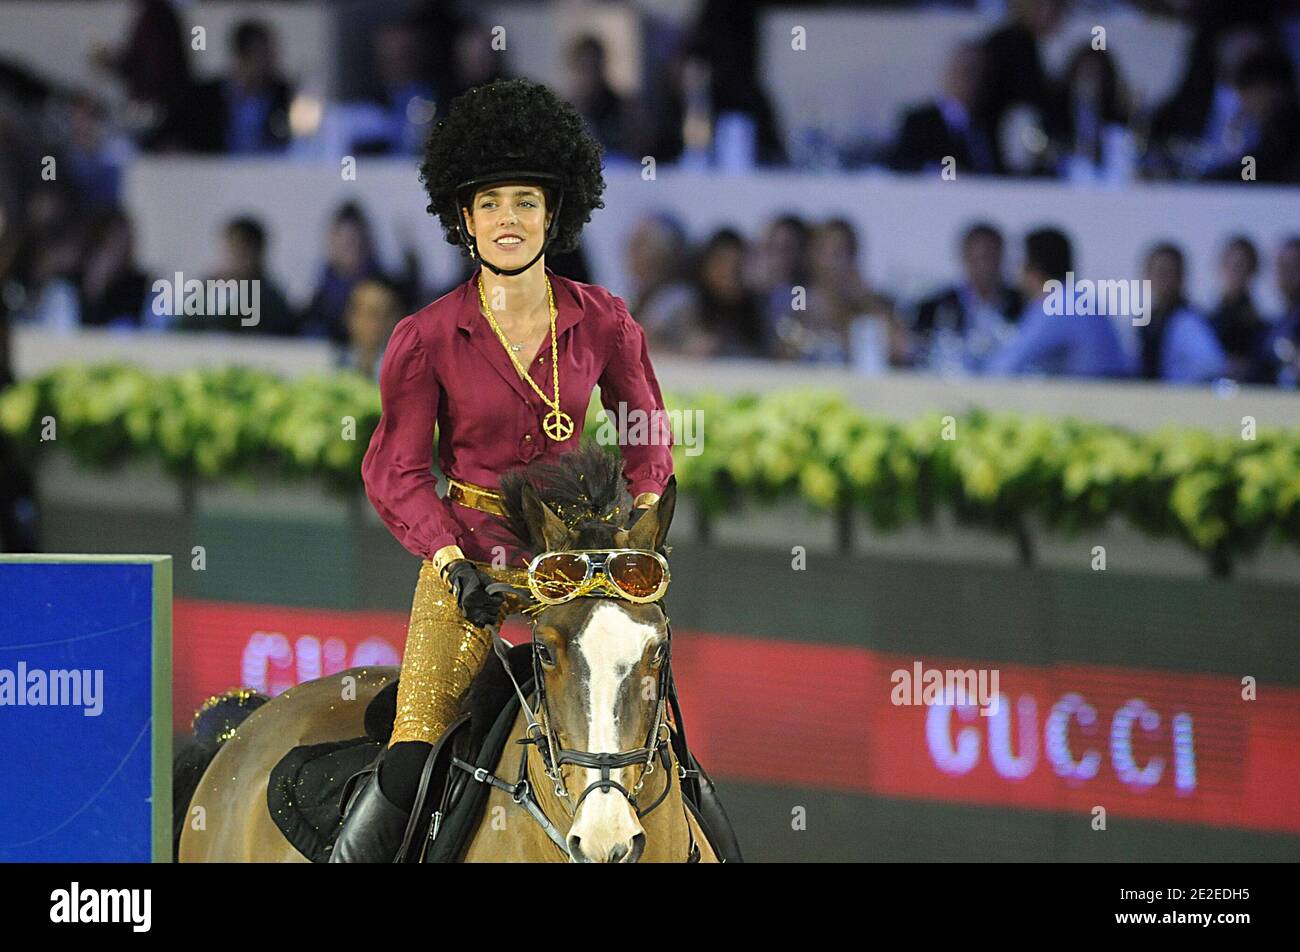 Charlotte Casiraghi participate at the Amade price during the Gucci Masters International Jumping Competition in Villepinte, North of Paris, France on December 3, 2011. Photo by Giancarlo Gorassini/ABACAPRESS.COM Stock Photo